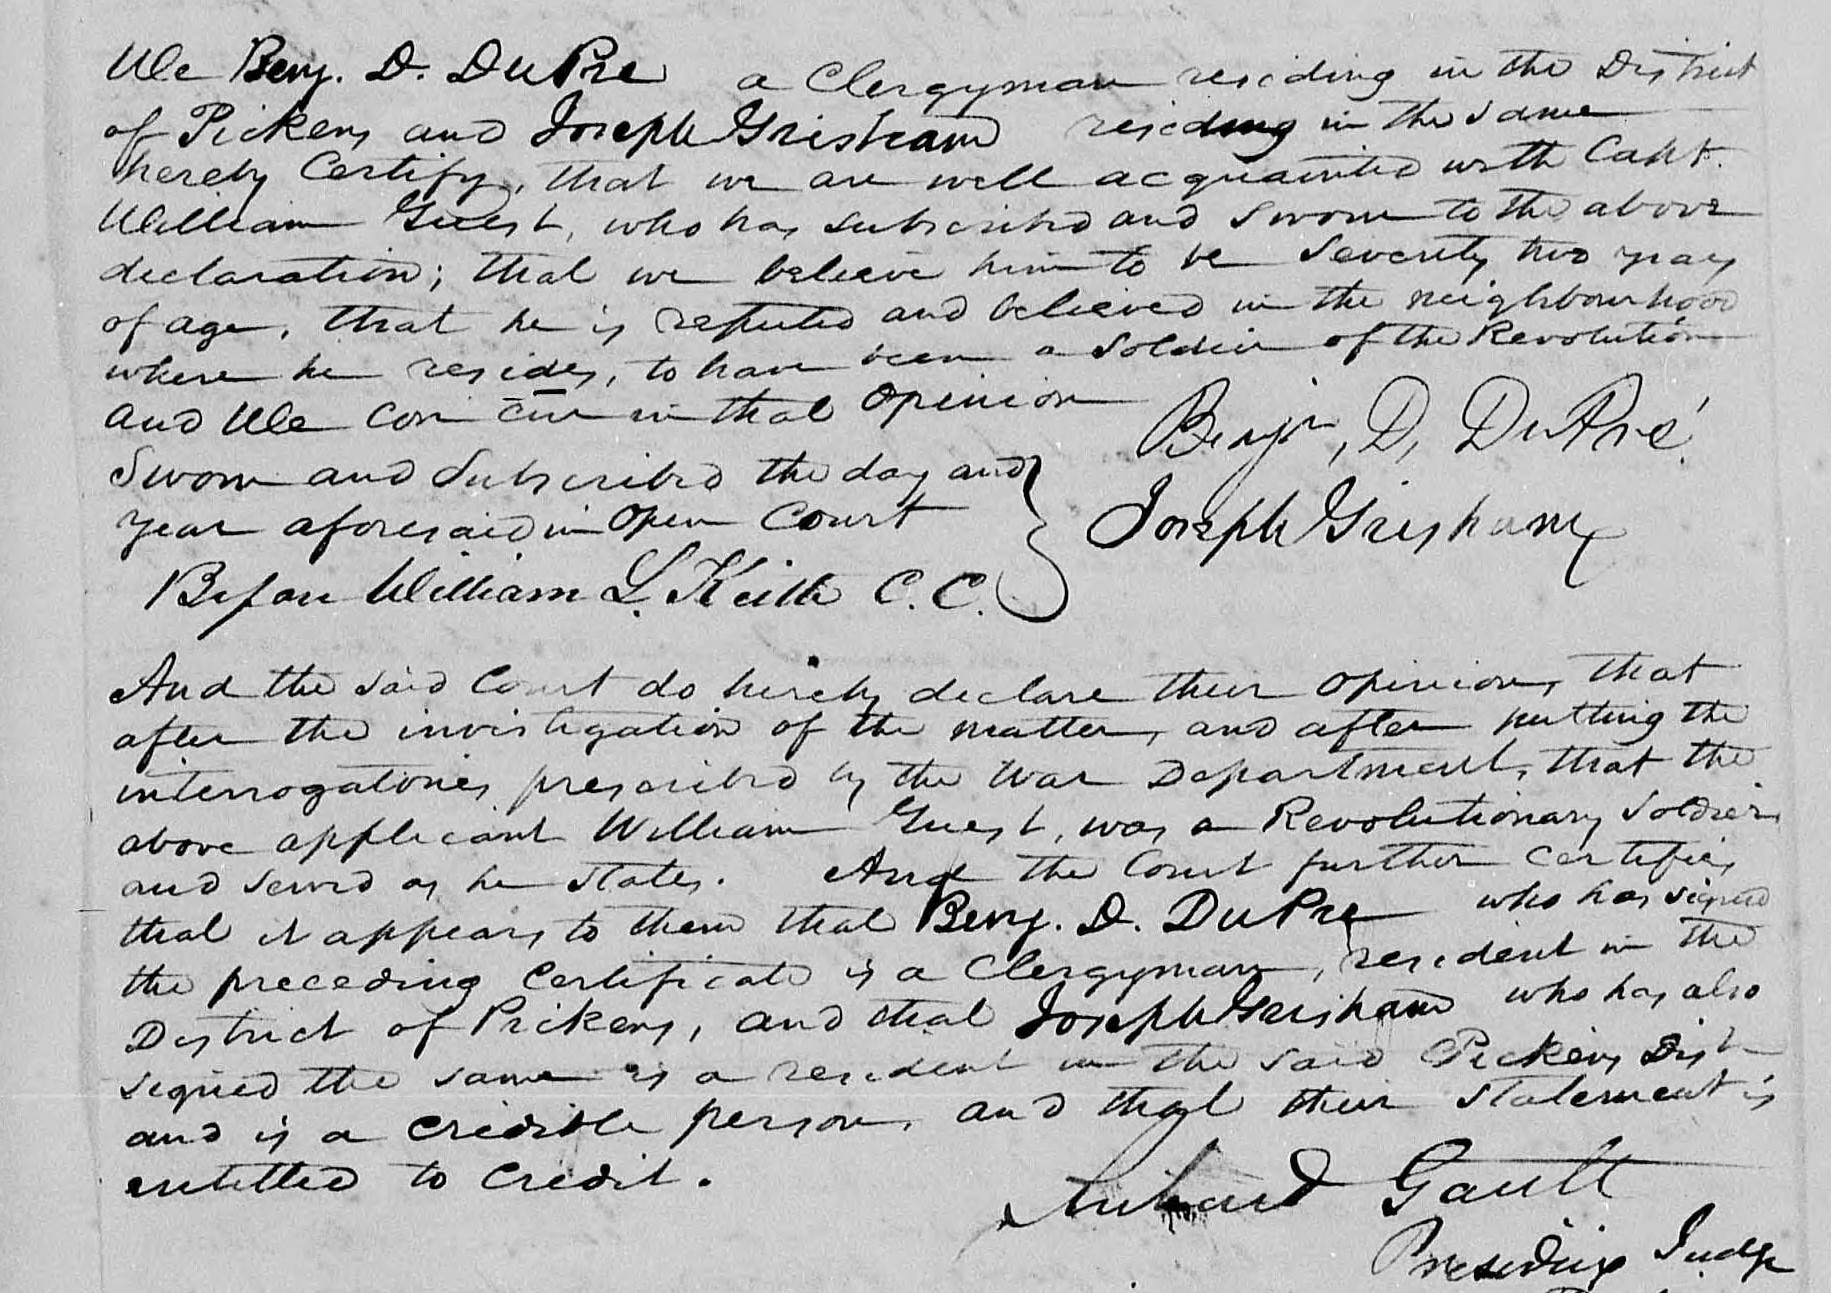 Affidavit of Benjamin D. DuPre and Joseph Grisham in support of a Pension Claim for William Guest, 9 March 1835